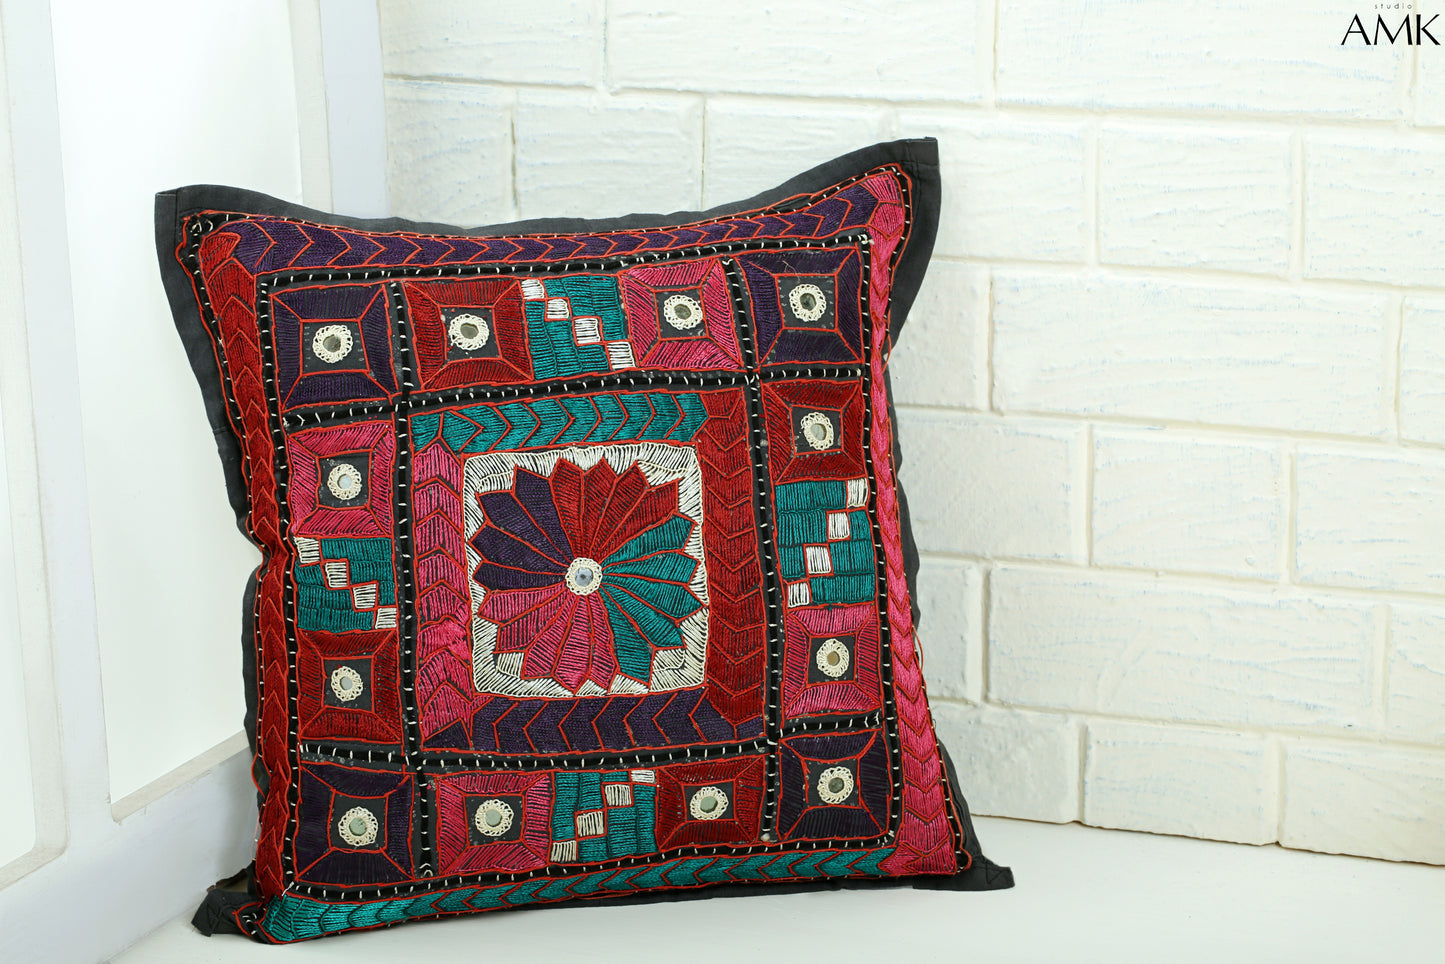 Hand Embroidered Cushion 11